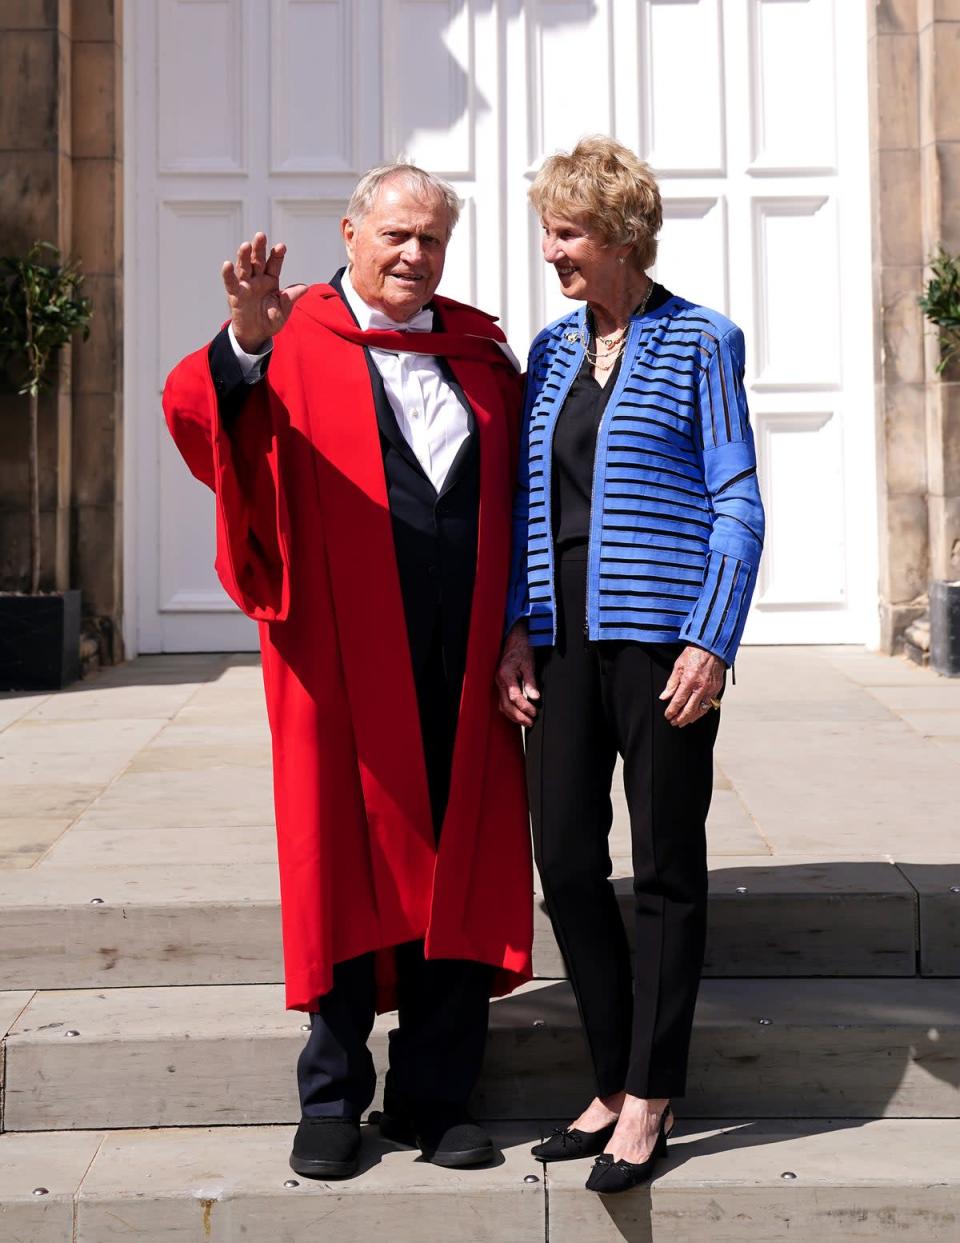 Jack Nicklaus (left), with wife Barbara, after being made an Honorary Citizen of St Andrews by The Royal Burgh of St Andrews Community Council during the ceremony at Younger Hall, St Andrews. Picture date: Tuesday July 12, 2022 (Jane Barlow/PA) (PA Wire)